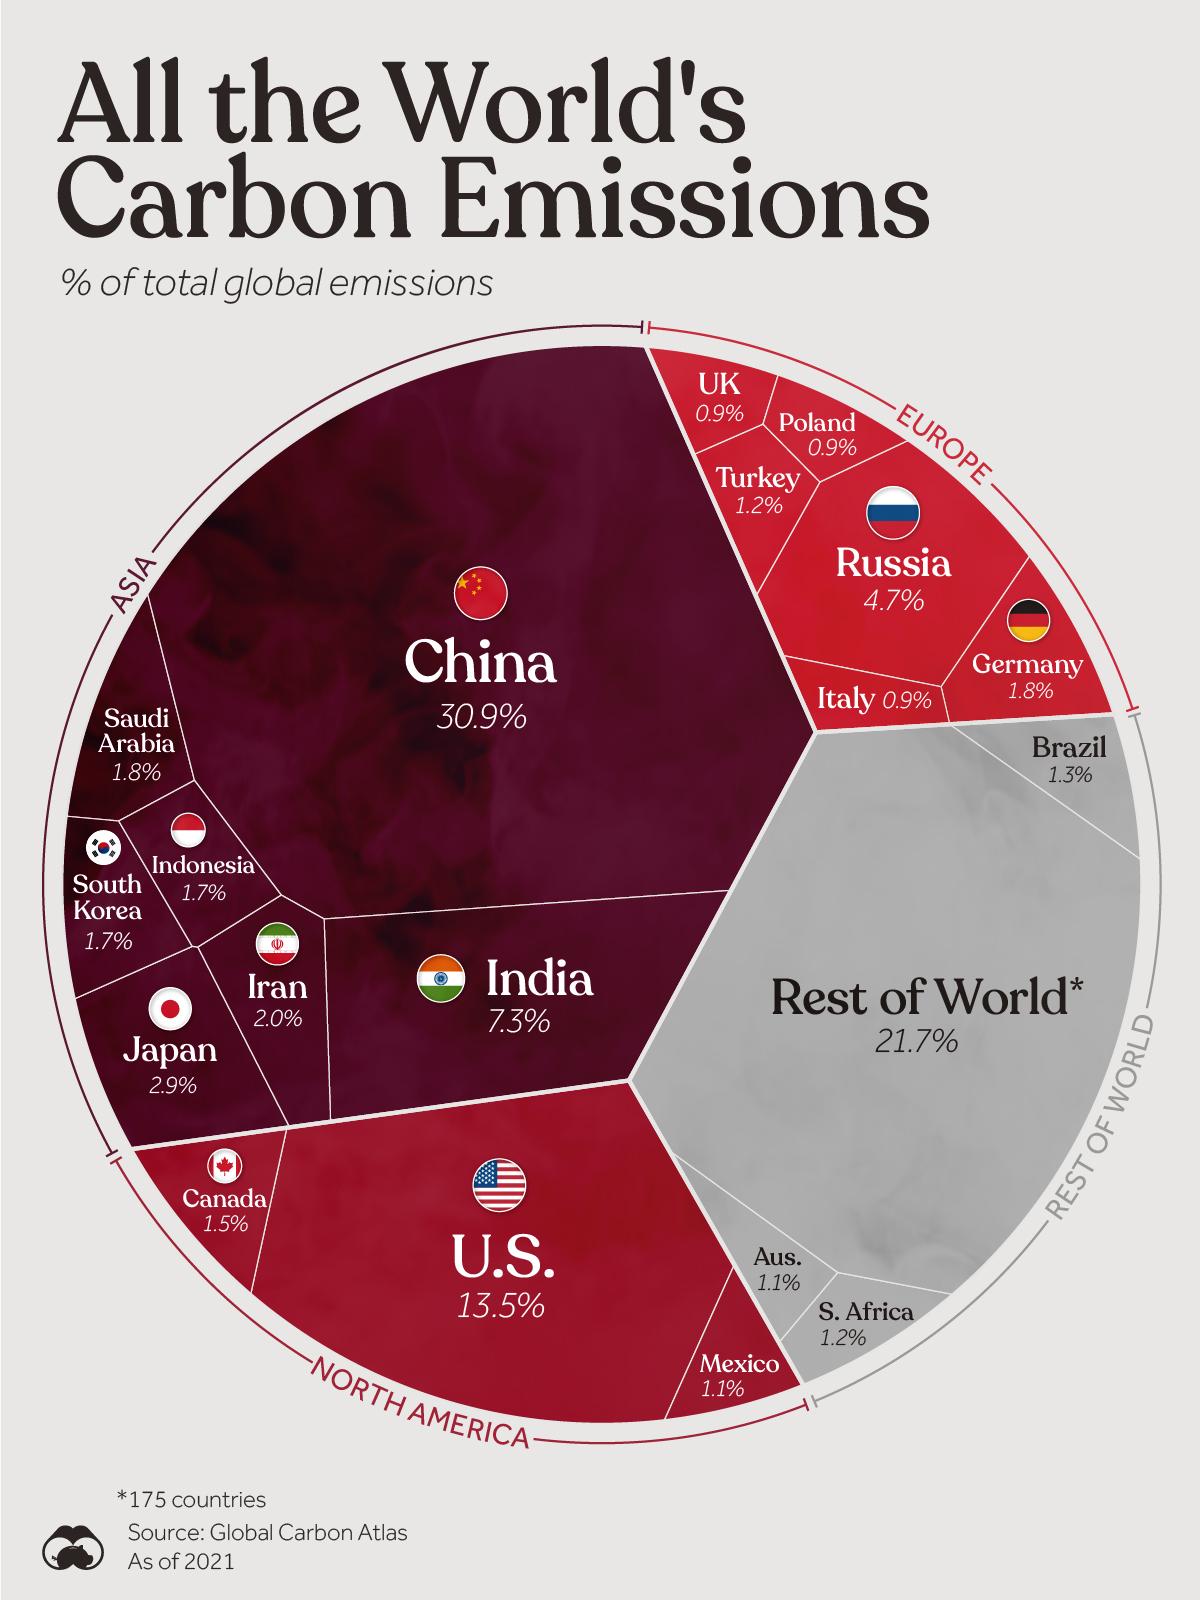 China, India, and the U.S. Account for 52% of Global CO2 Emissions